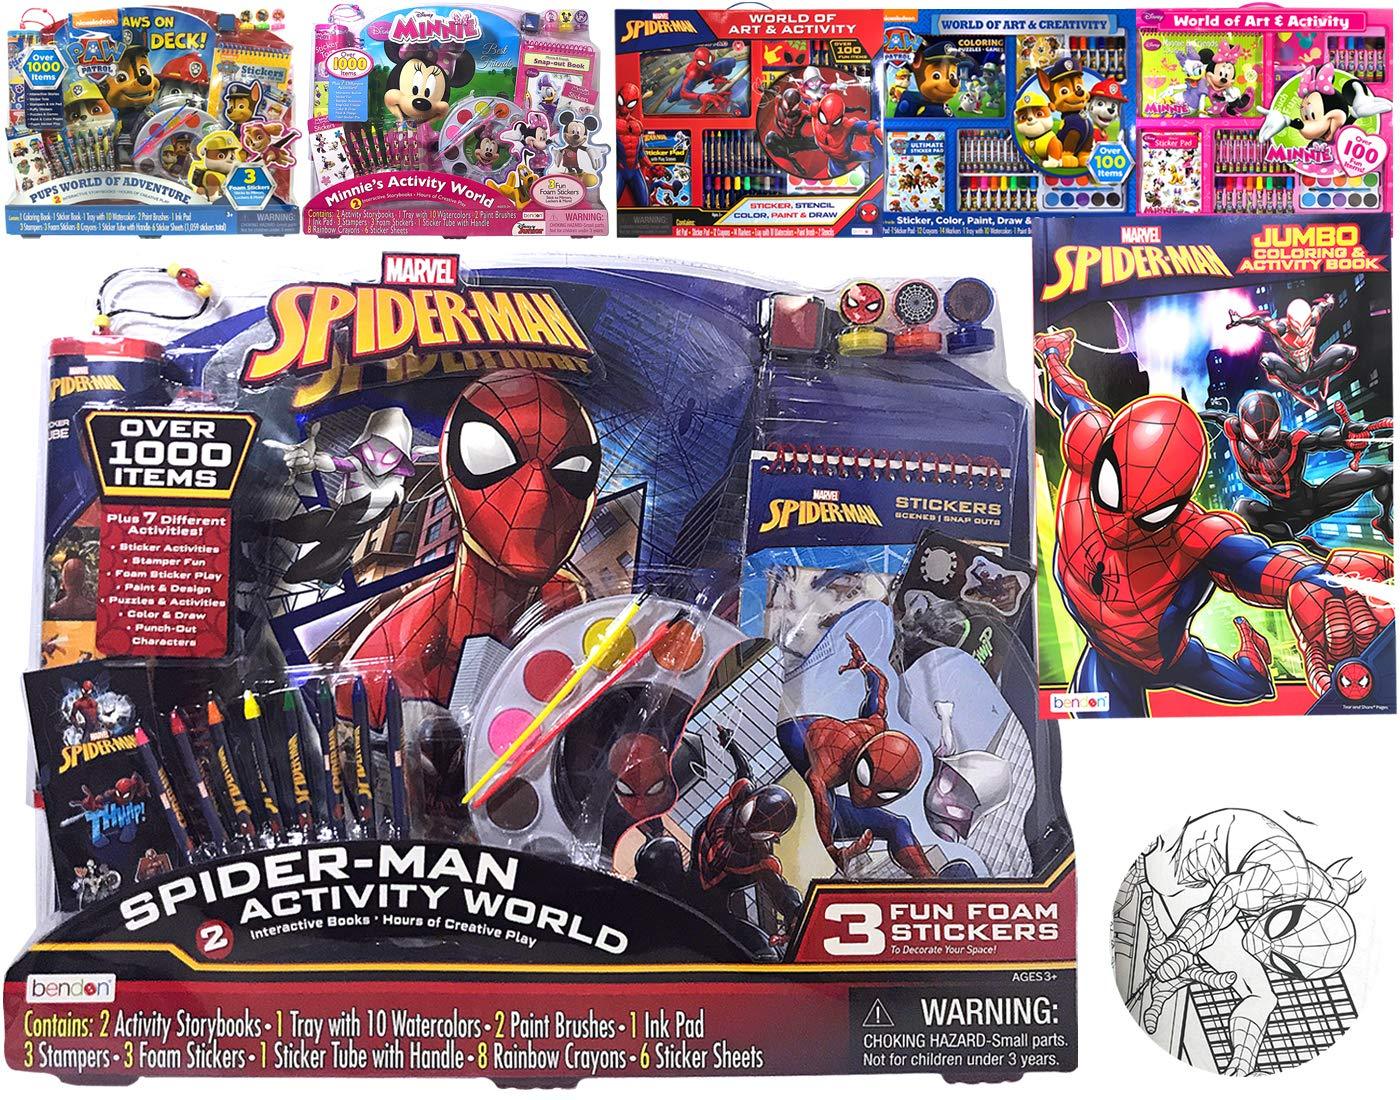 Artist Marvel Superheroes Spiderman Activity Giant Stationery Gift Set 1000pcs- Story Book, Painting Kit, Crayons, Stampers, Foam Stickers